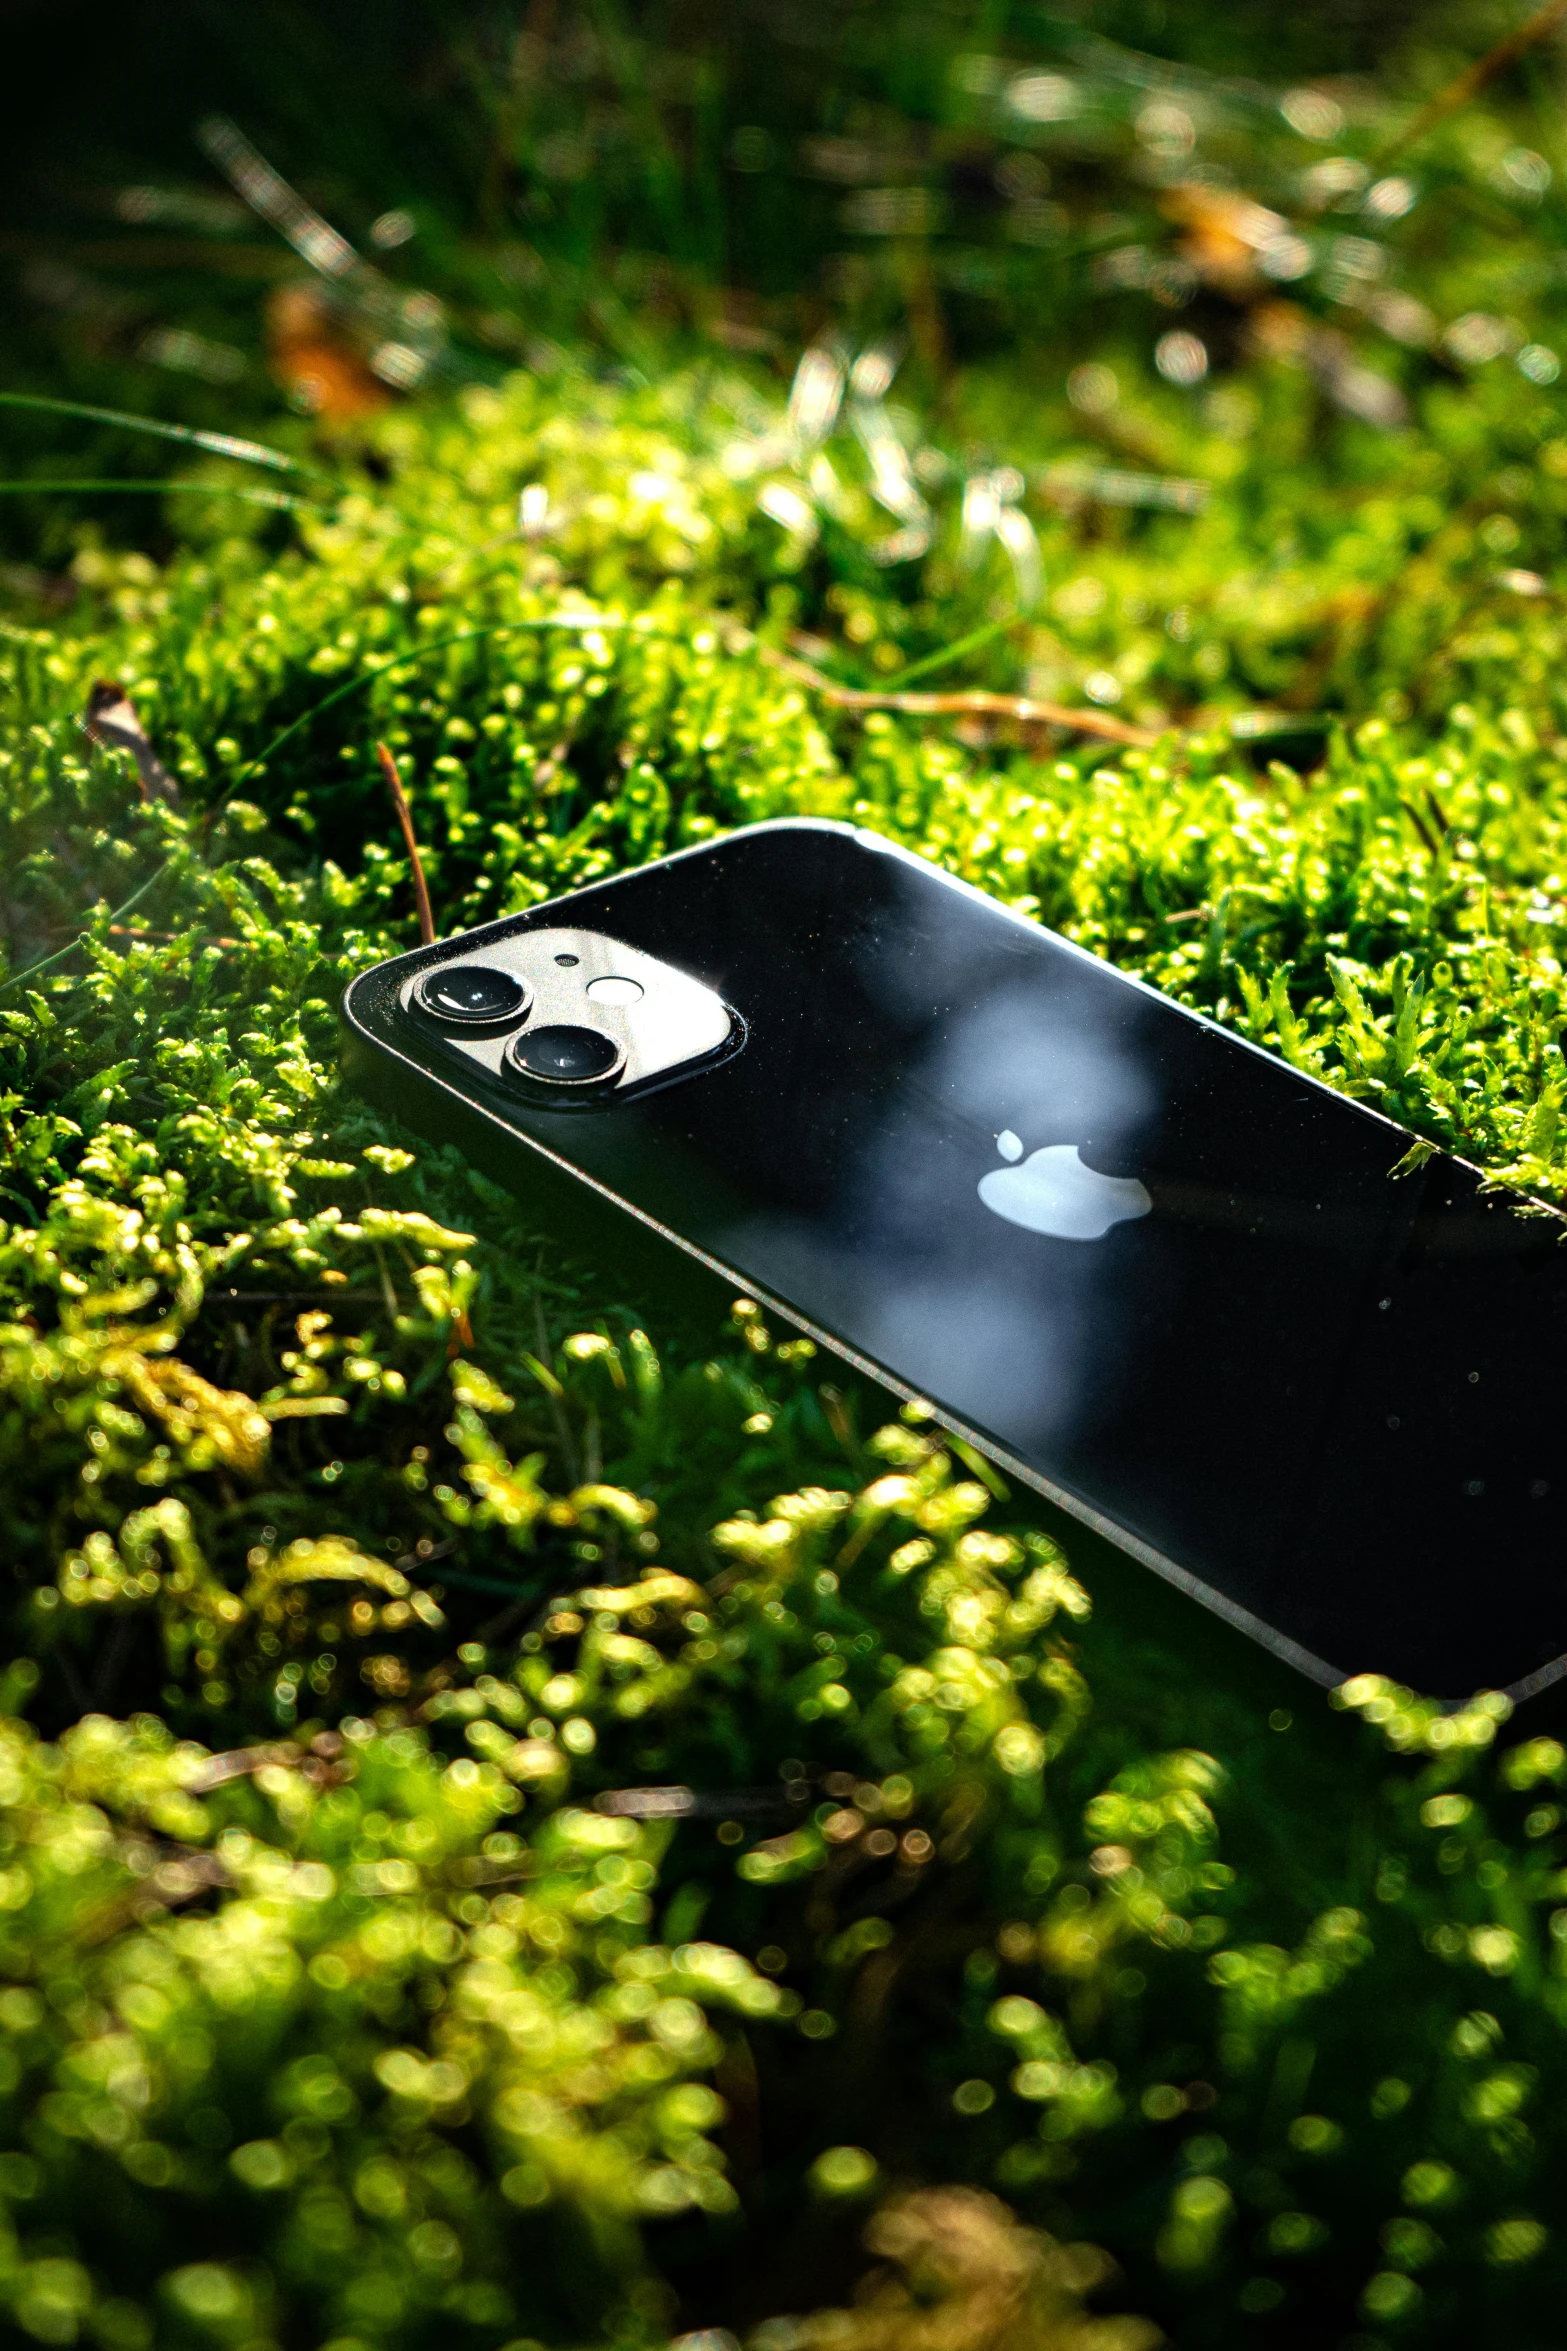 a close up of a cell phone on a mossy surface, by Niko Henrichon, iphone 1 3 pro max, sustainable materials, fake grass, with apple